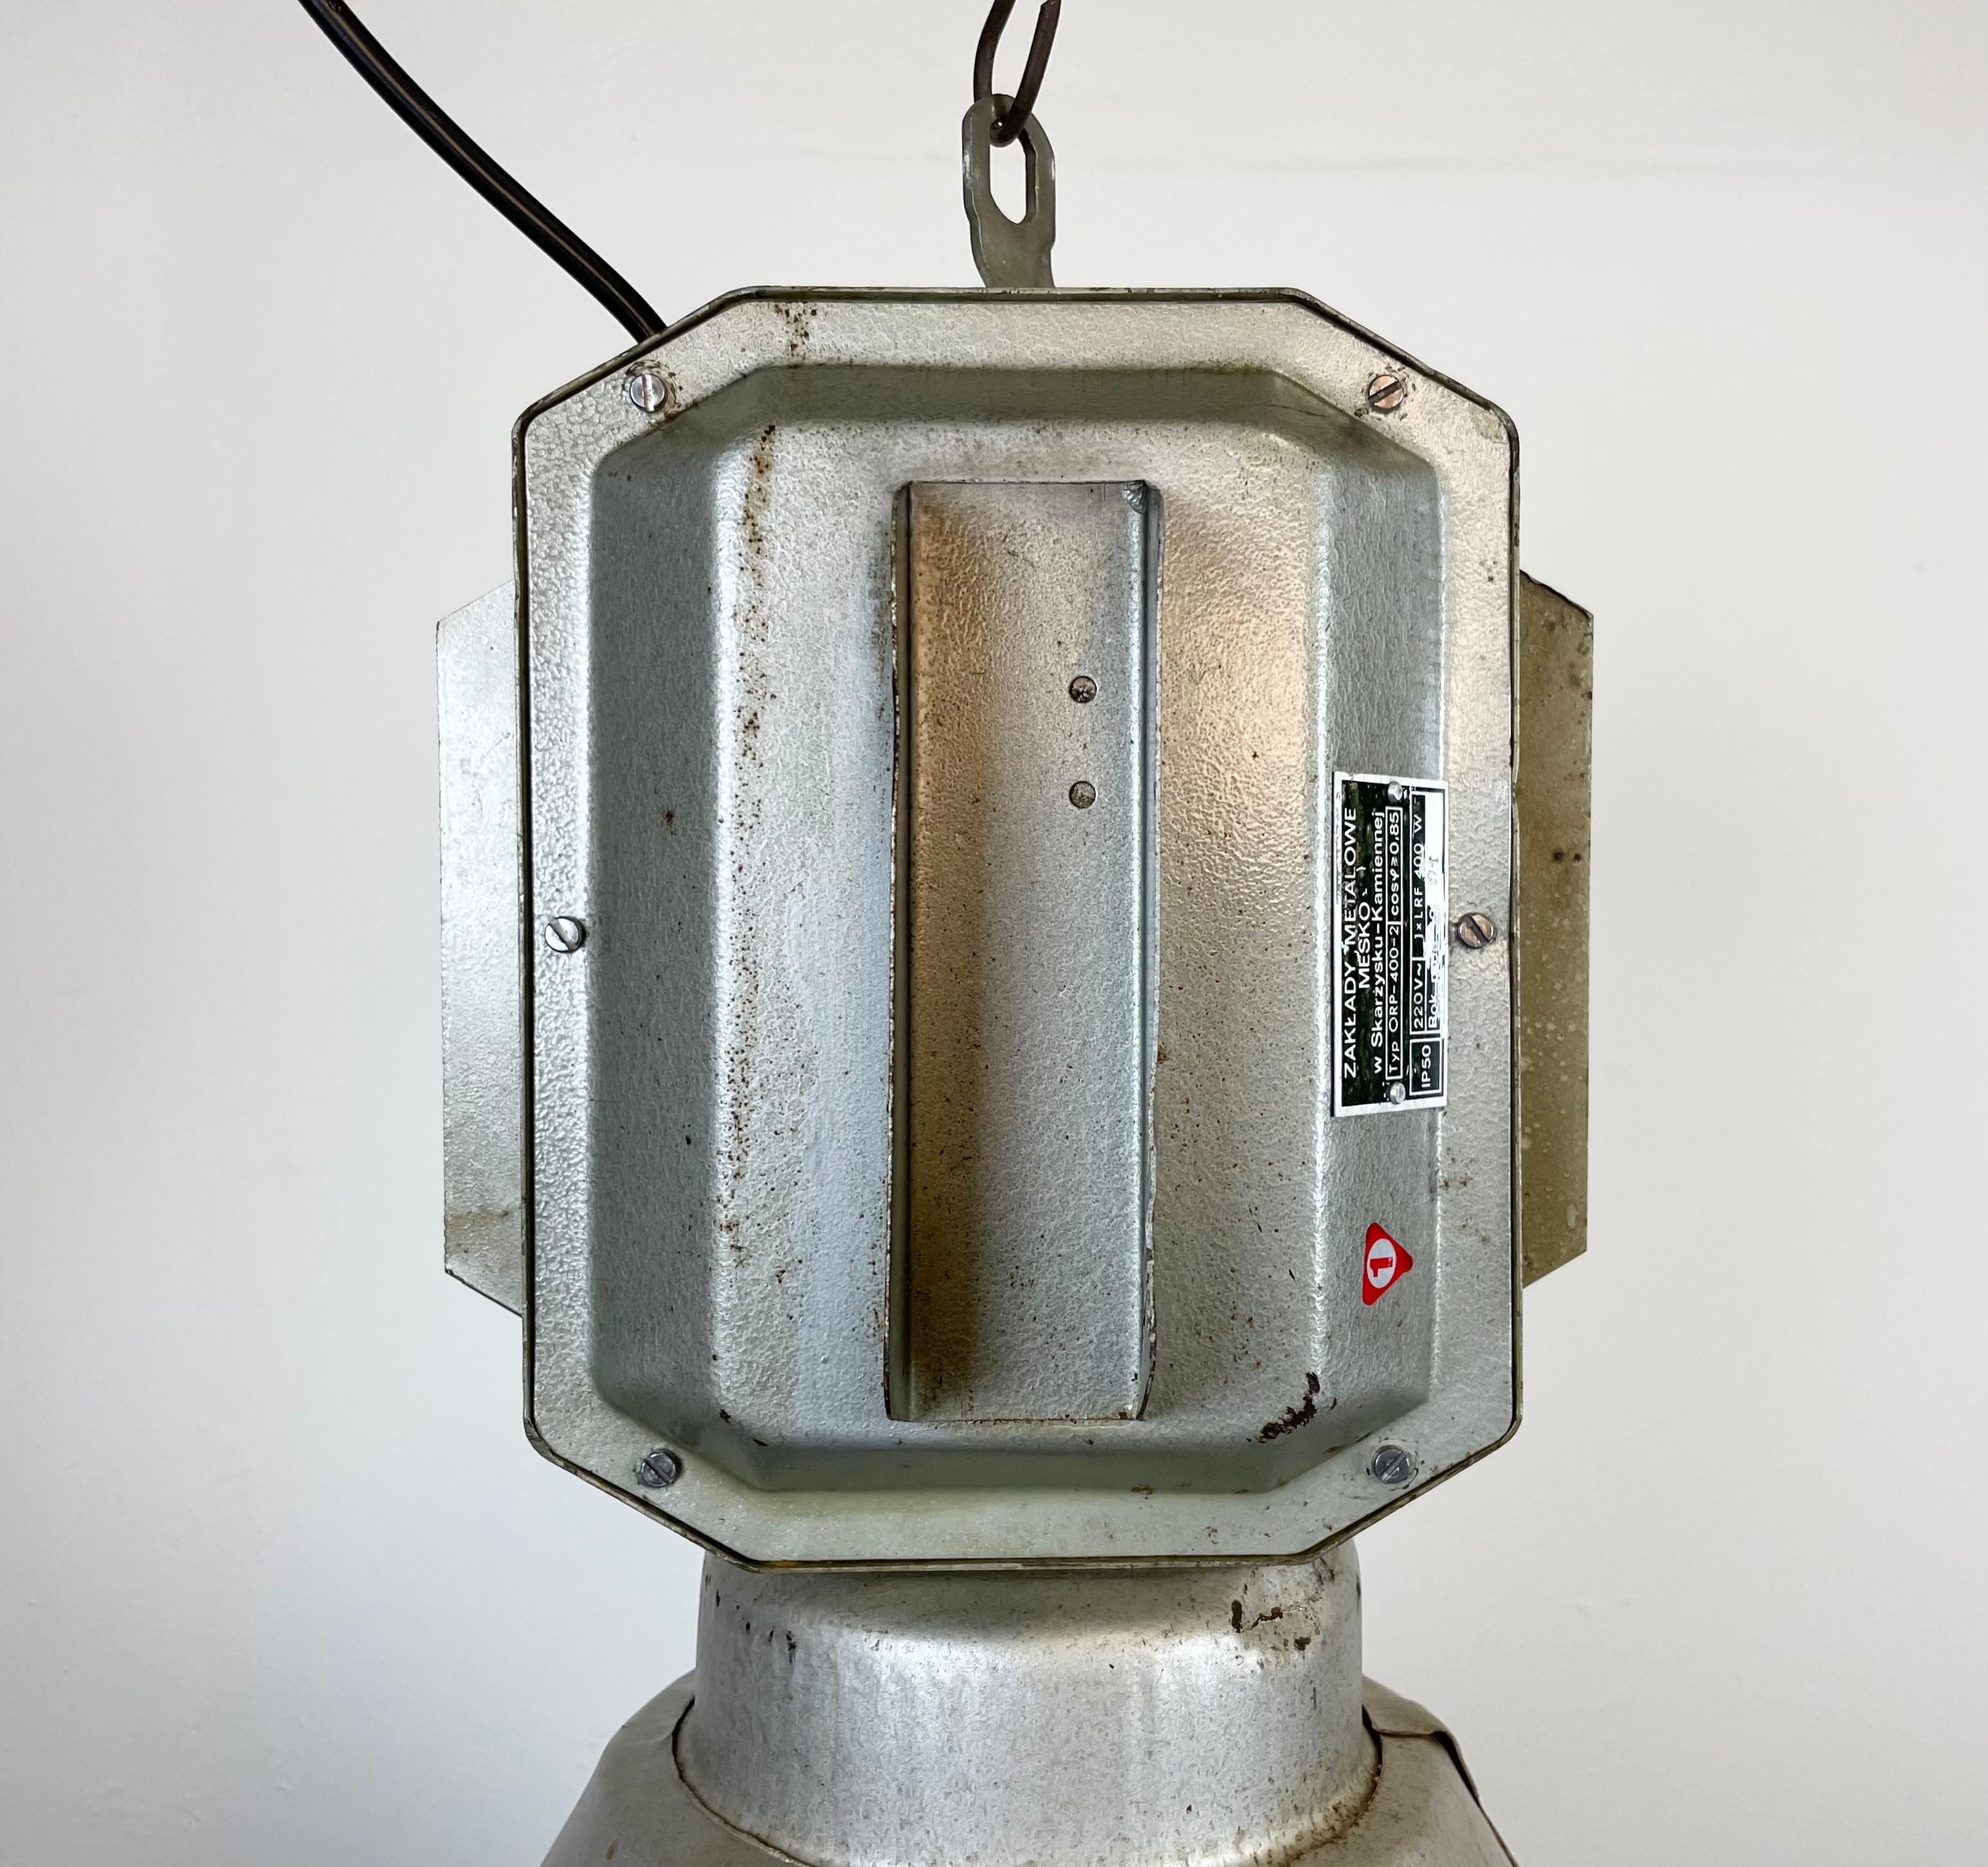 Impressive 'bomb' hanging lamp manufactured by MESKO in Skarzysko-Kamienna in Poland during the 1990s. It features a hammerpaint iron body and an iron grid. New porcelain socket requires E 27/ E26 light bulbs. New wire. The weight of the lamp is 5